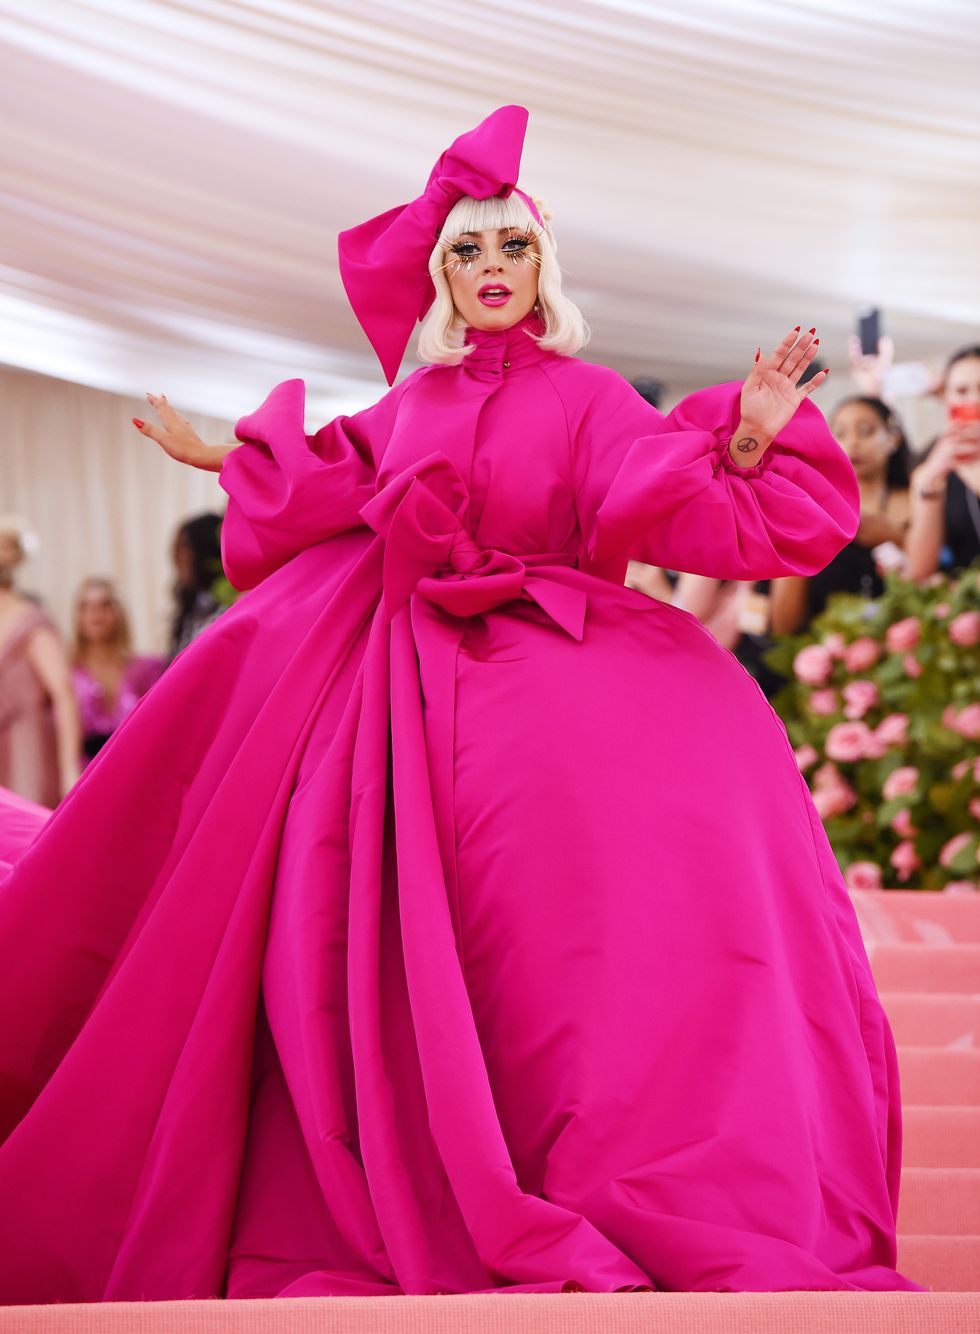 Met Gala 2019 - The Met Gala Red Carpet Dresses And Gowns That Made The ...